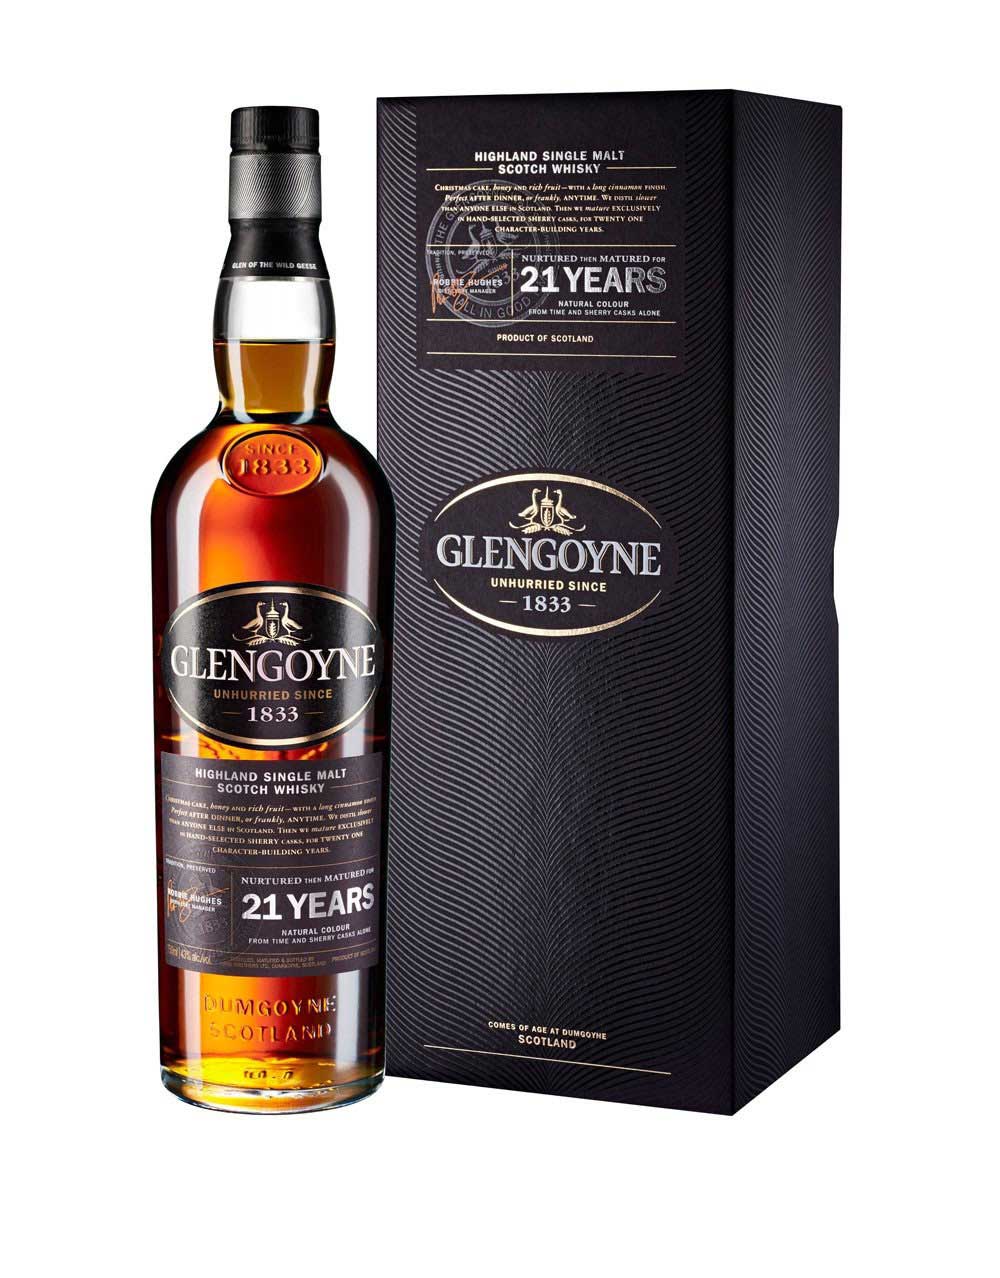 The Glenrothes Wine Merchant Collect Beaucastle Cask No. 5 Scotch Whisky